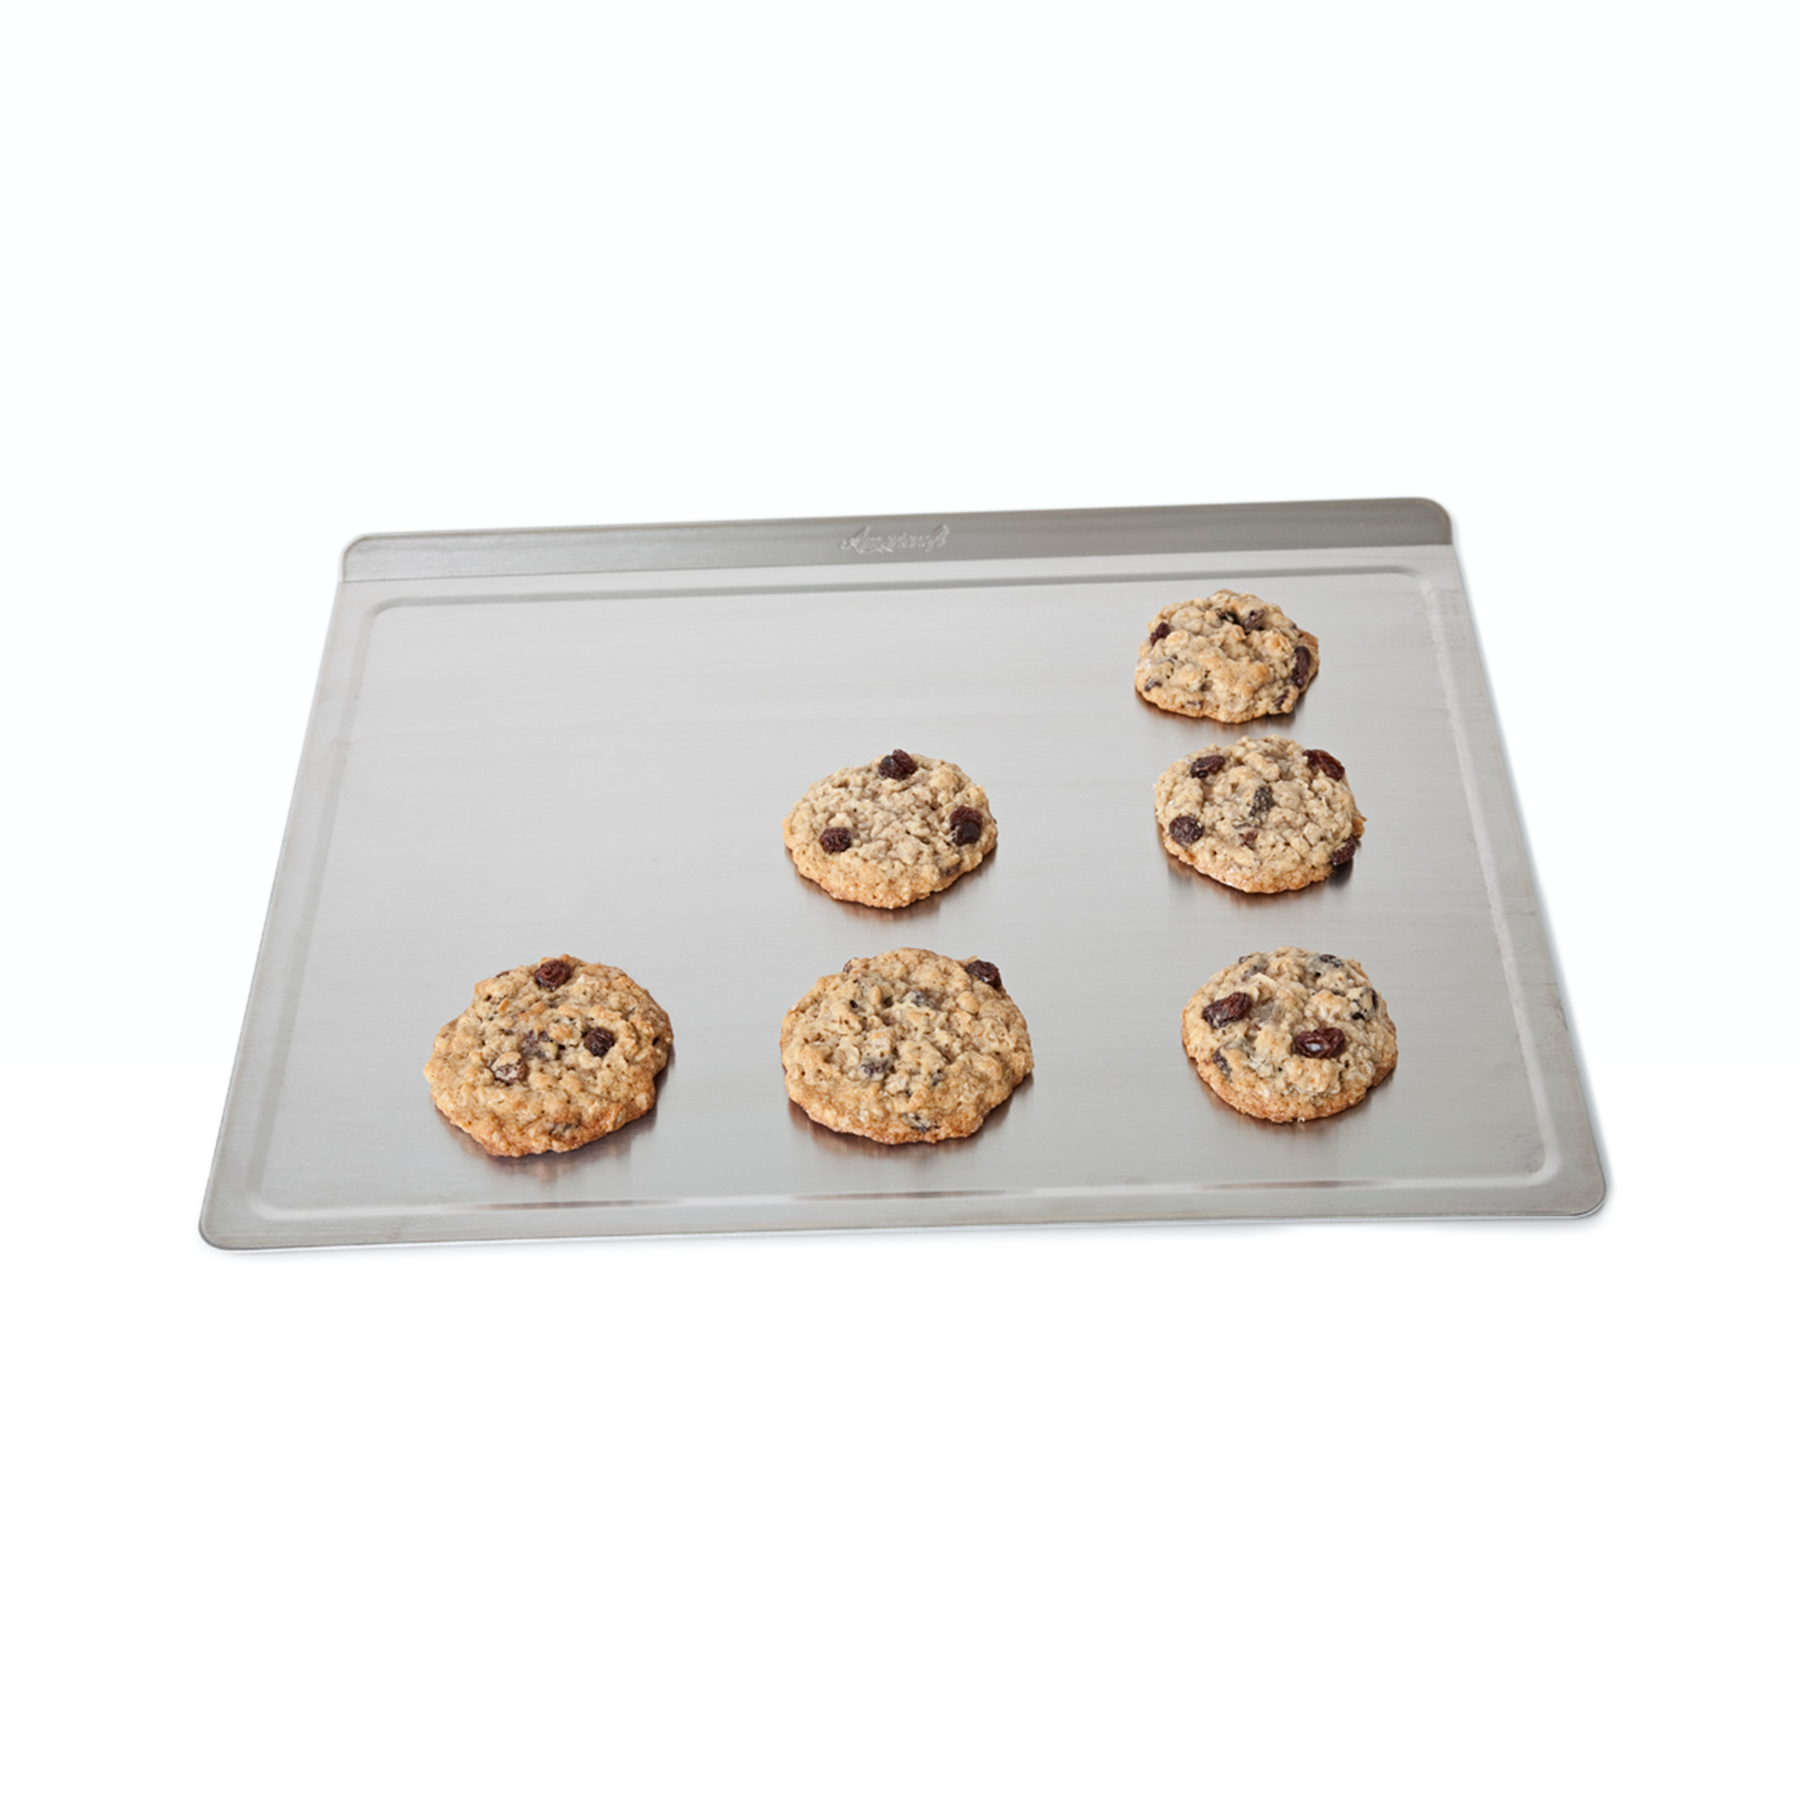 Multi Ply Stainless Steel Cookie Sheet - Large - WaterlessCookware